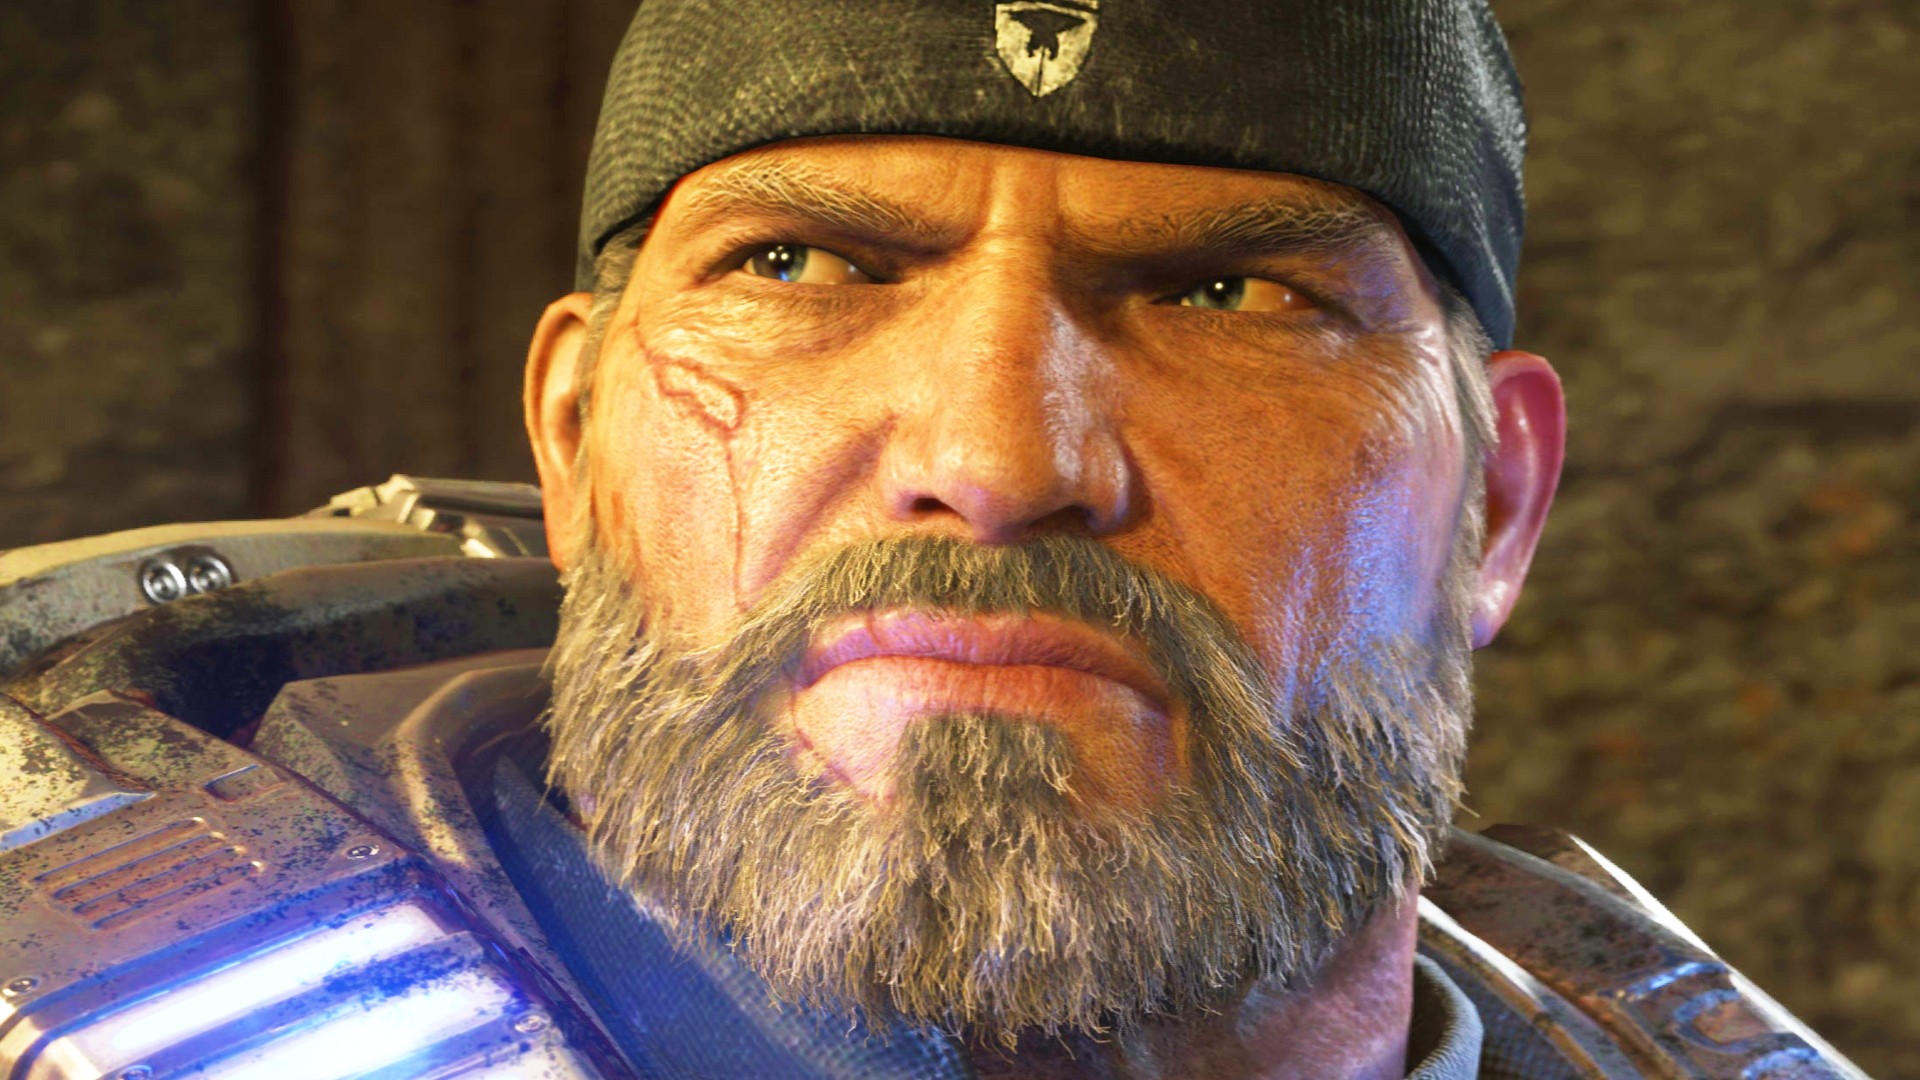 Gears Of War' is returning with an untitled game in the works